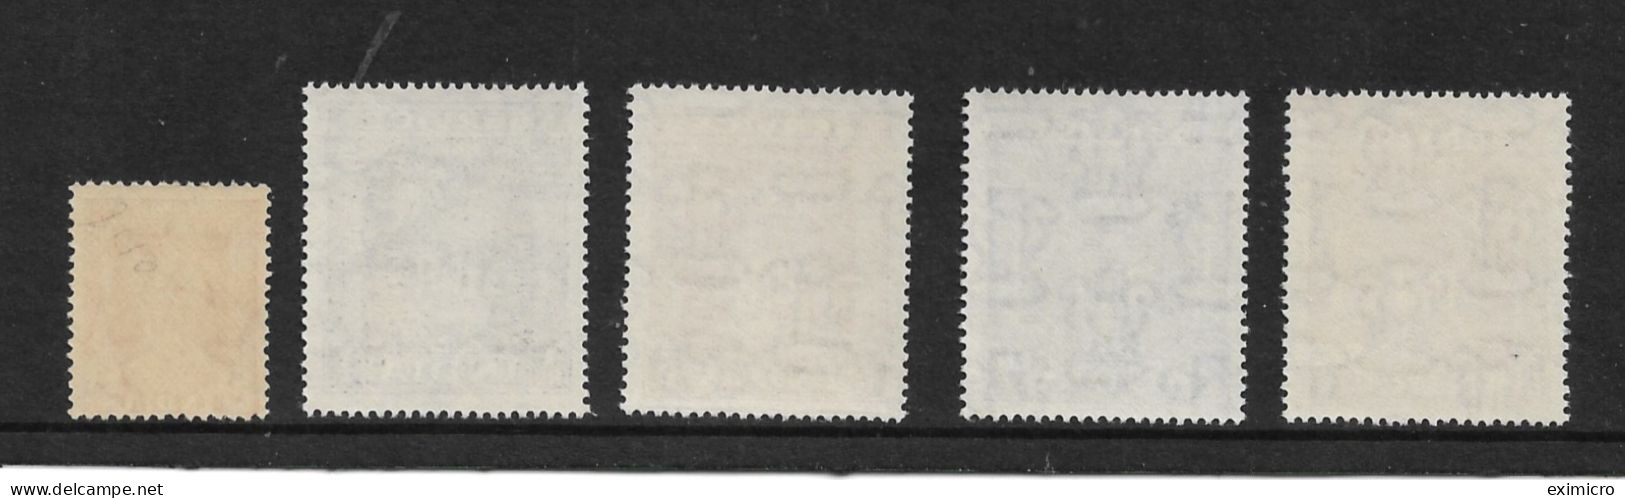 INDIA 1950 - 1951 OFFICIALS 3a, 1R - 10R SG O156, O161 - O164 UNMOUNTED MINT Cat £27.75 - Official Stamps